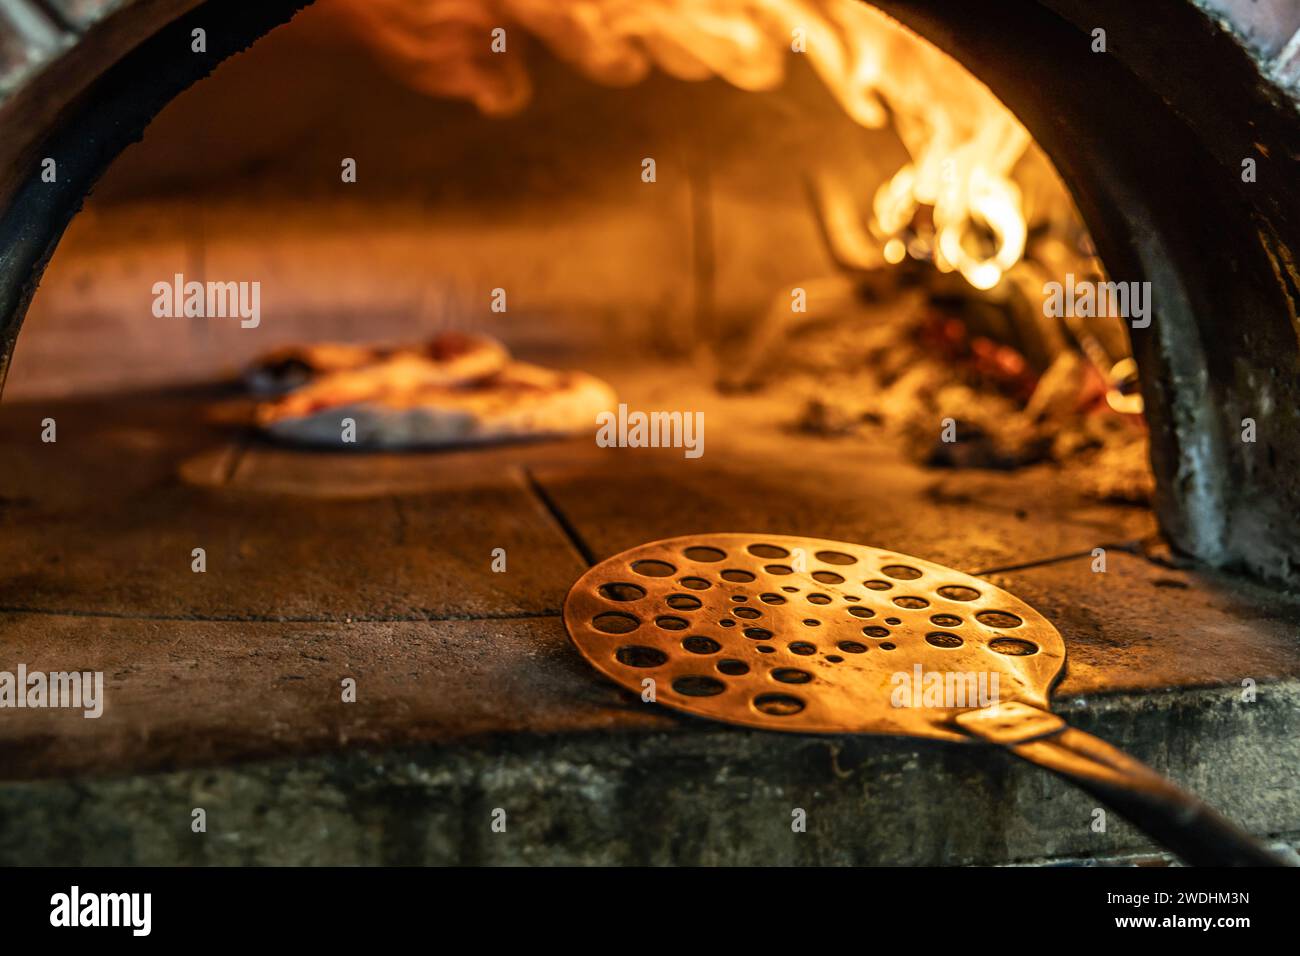 Traditional oven for baking pizza with burning wood and shovel. A stainless steel pizza shovel placed on the edge of a brick oven. Stock Photo